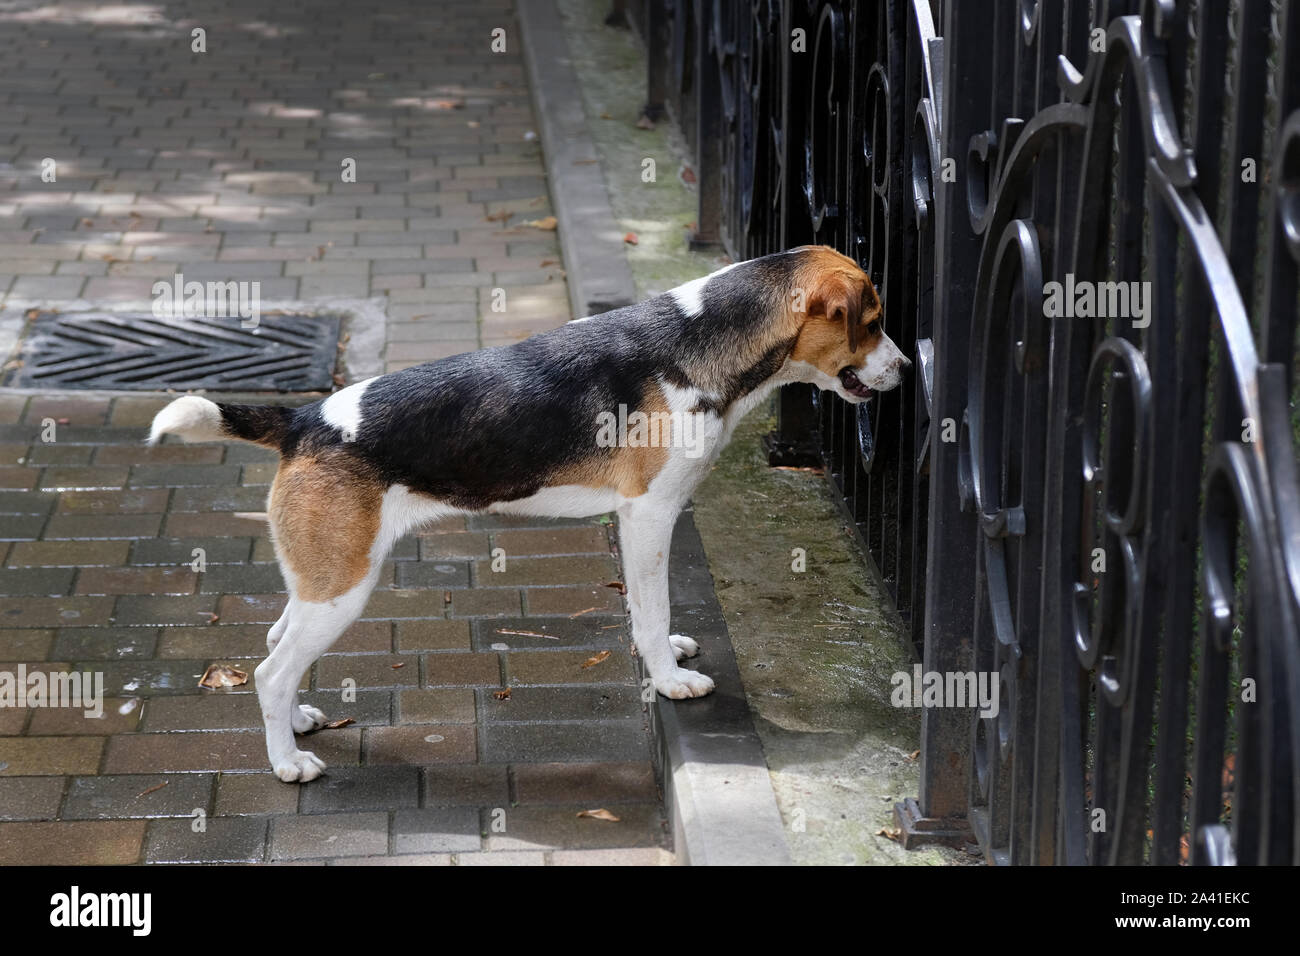 The Dog Is Black With White And Brown Spots Looking At The Fence The Dog Looks Interested In The Iron Fence Watching What Is Happening Behind Him Stock Photo Alamy